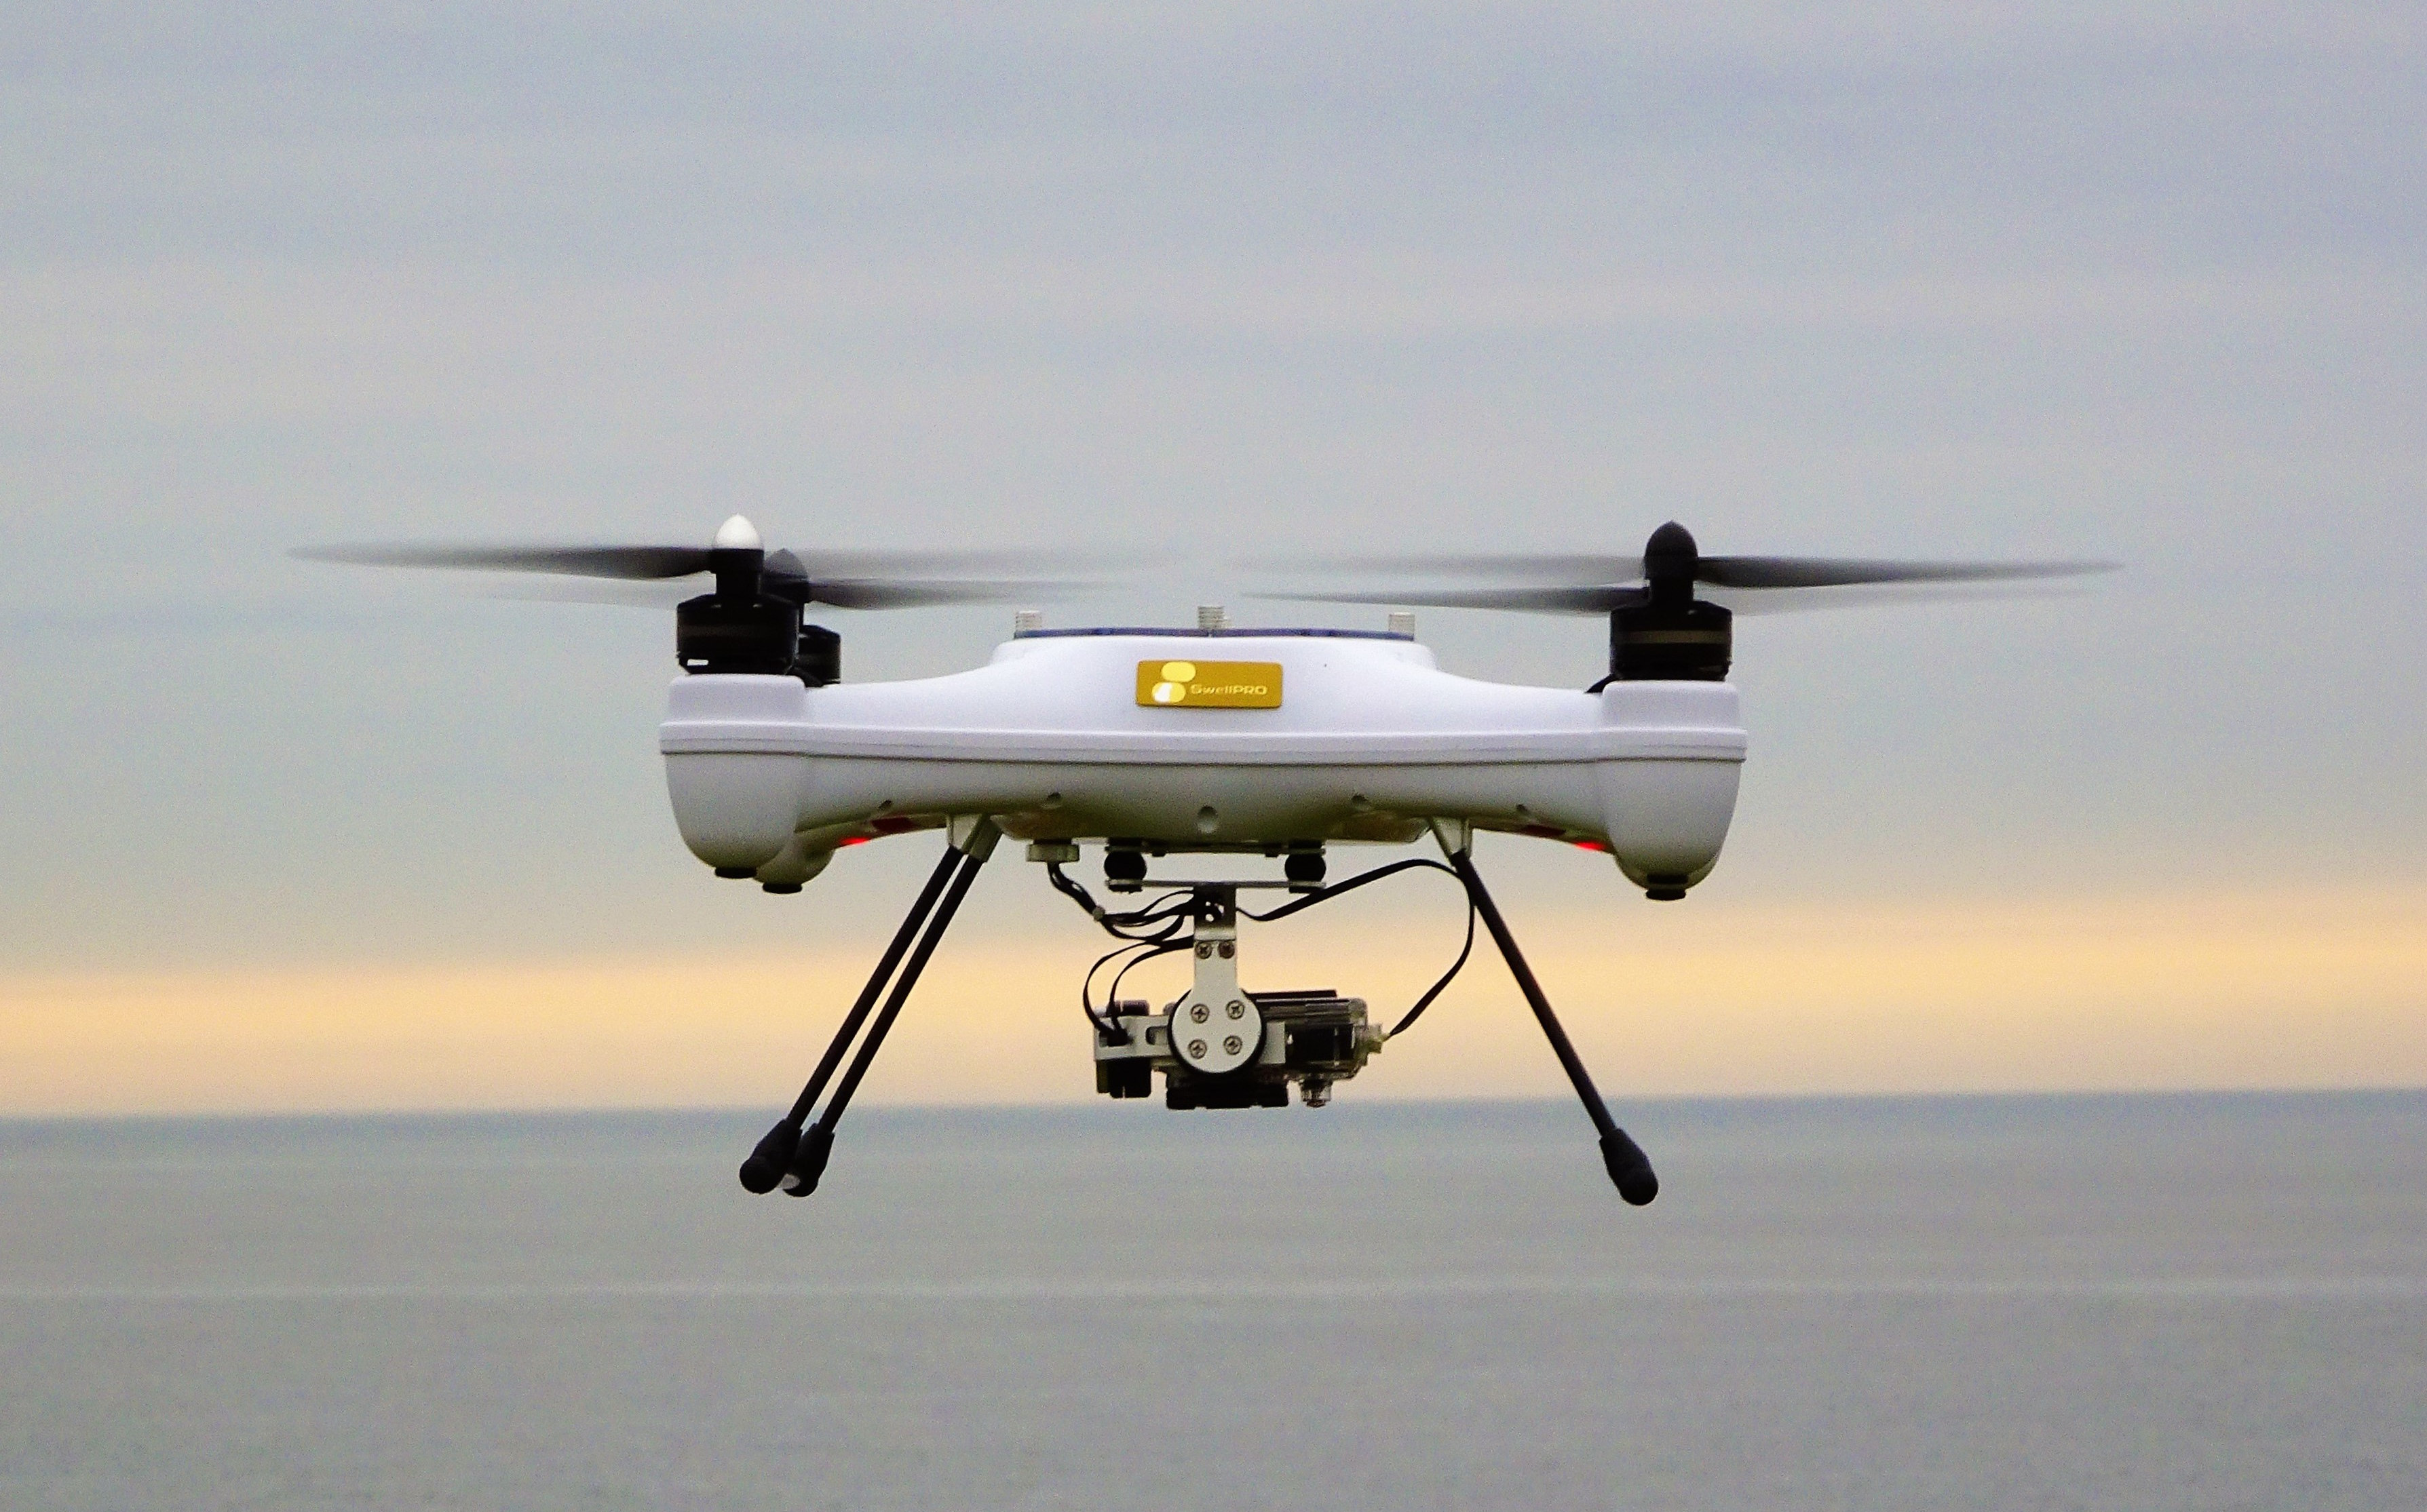 Researchers trial assessing renewable energy sites with drones